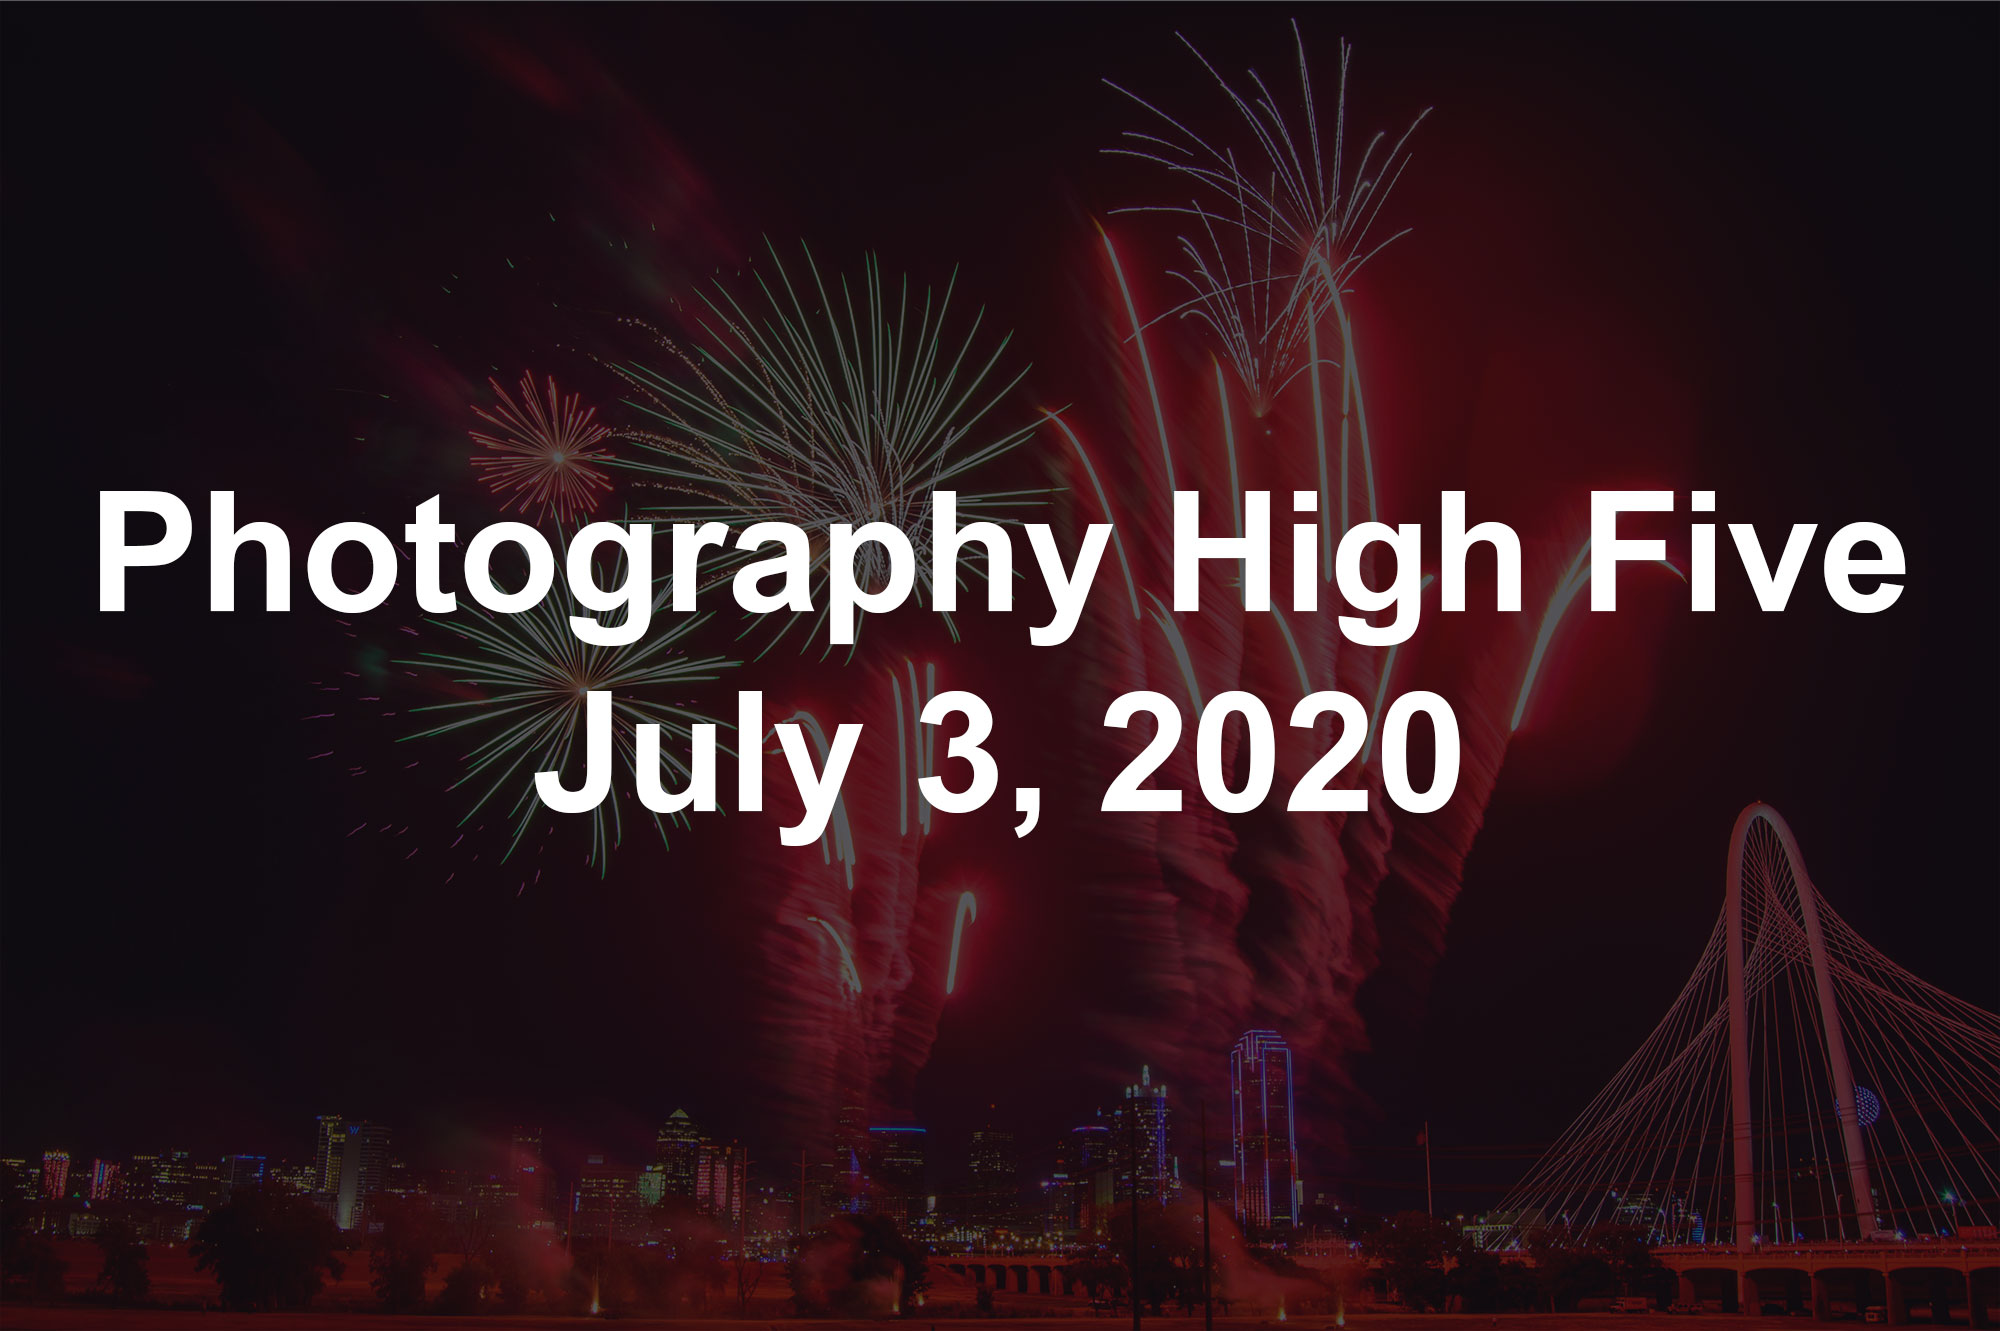 Photography High Five July 3, 2020